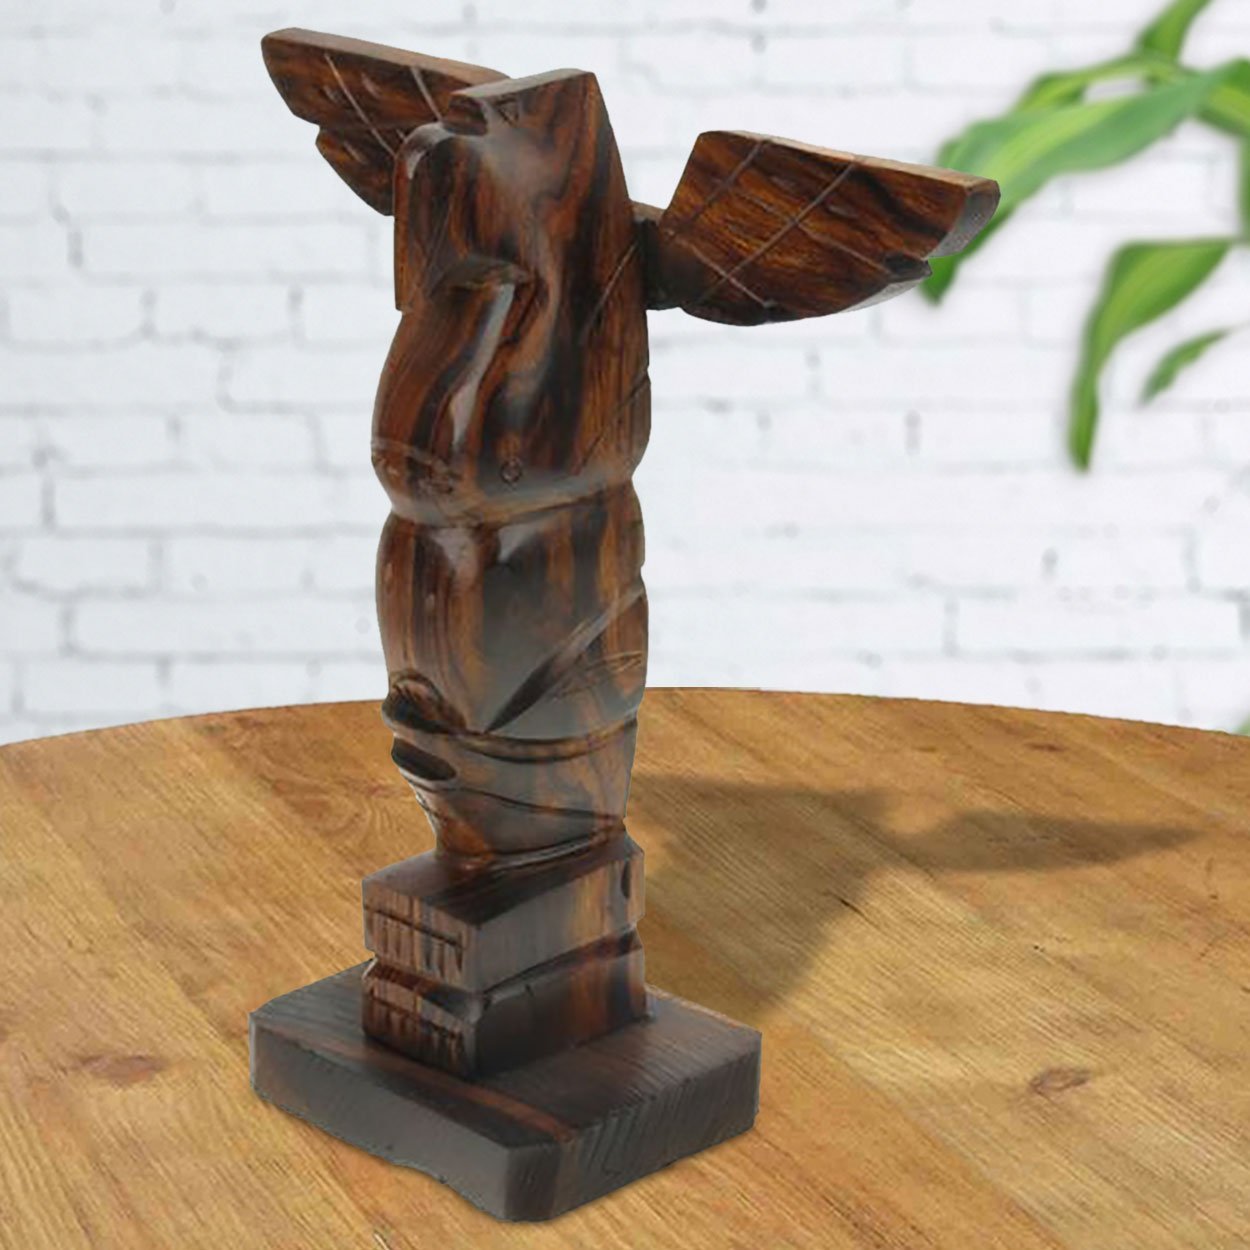 172210 - 9in Tall Totem Pole Ironwood Carving